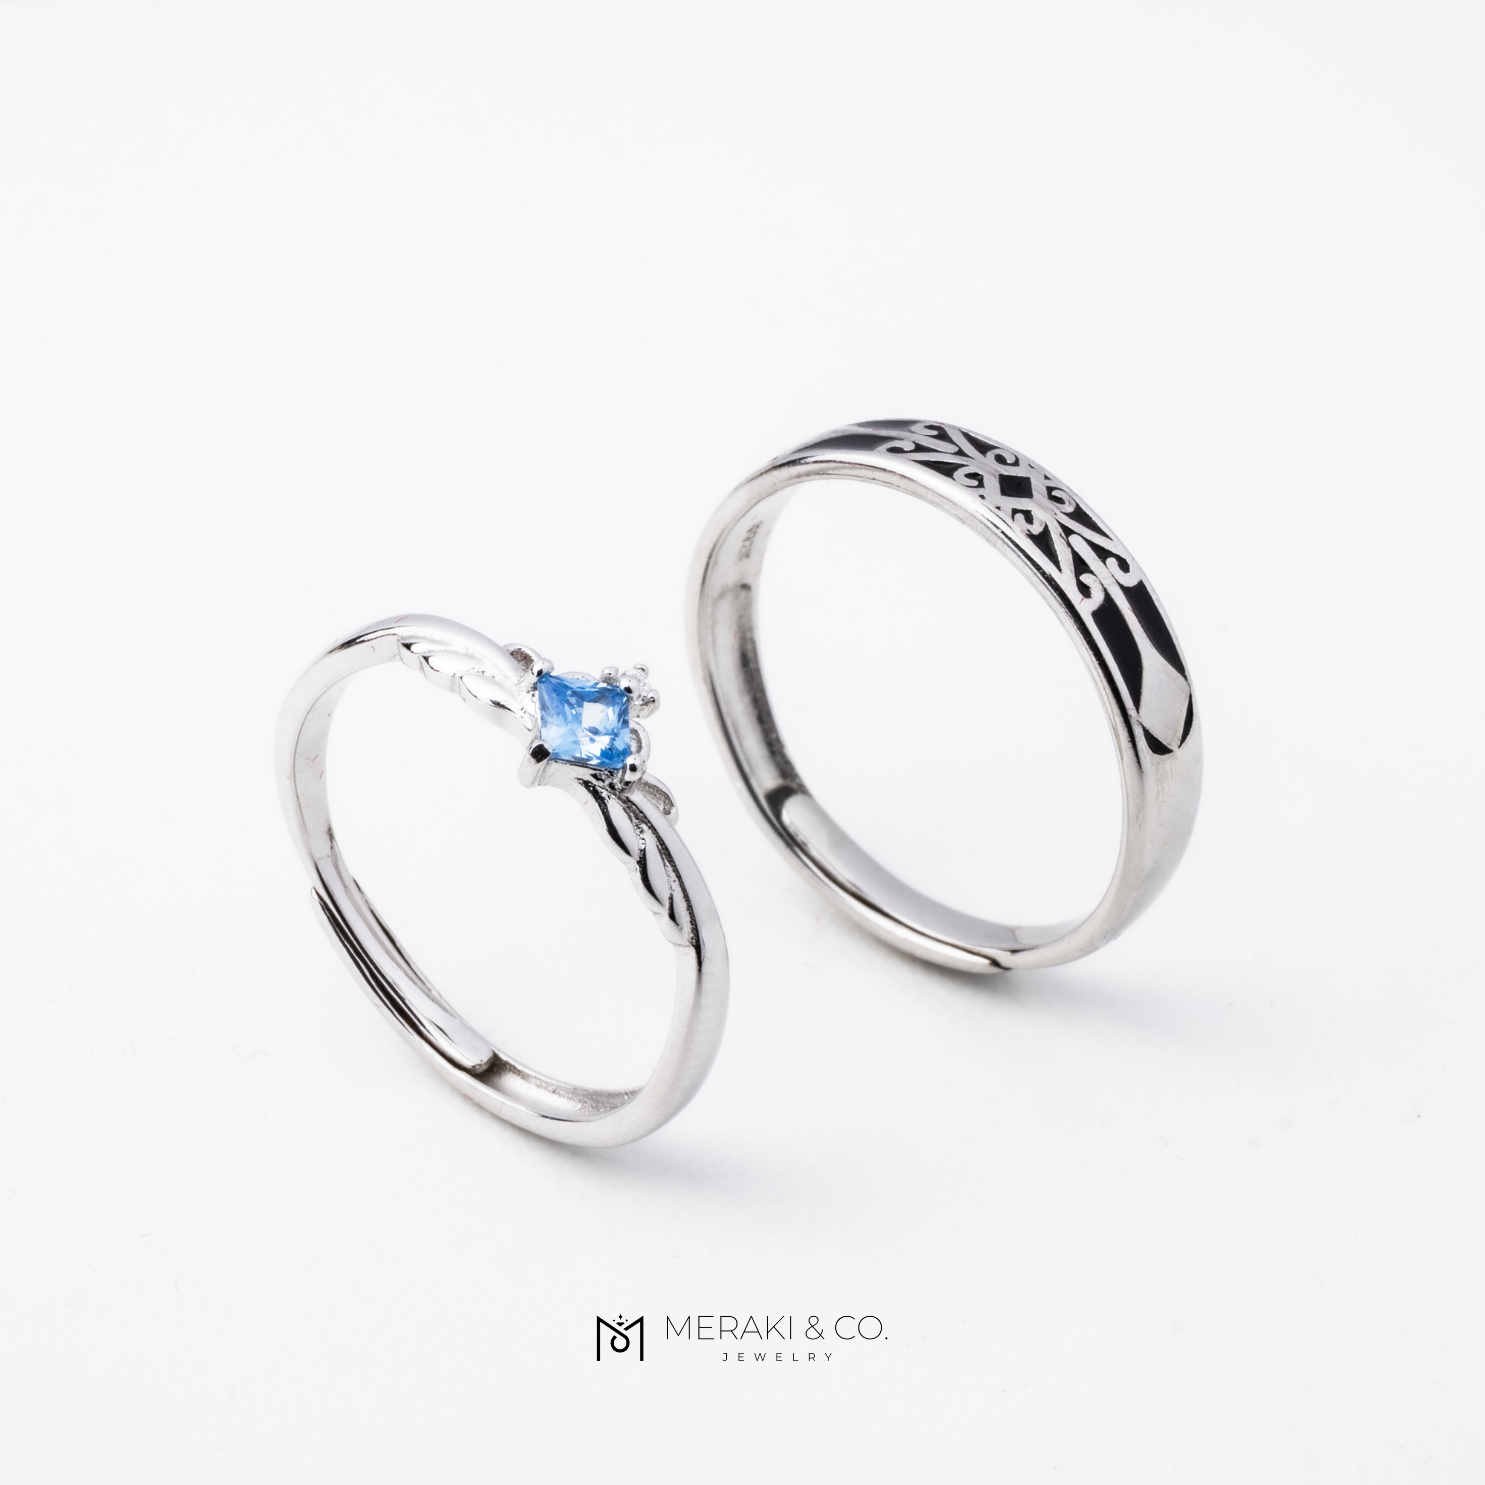 Super cute couple activity idea in Kyoto! Get handcrafted couple rings... |  TikTok